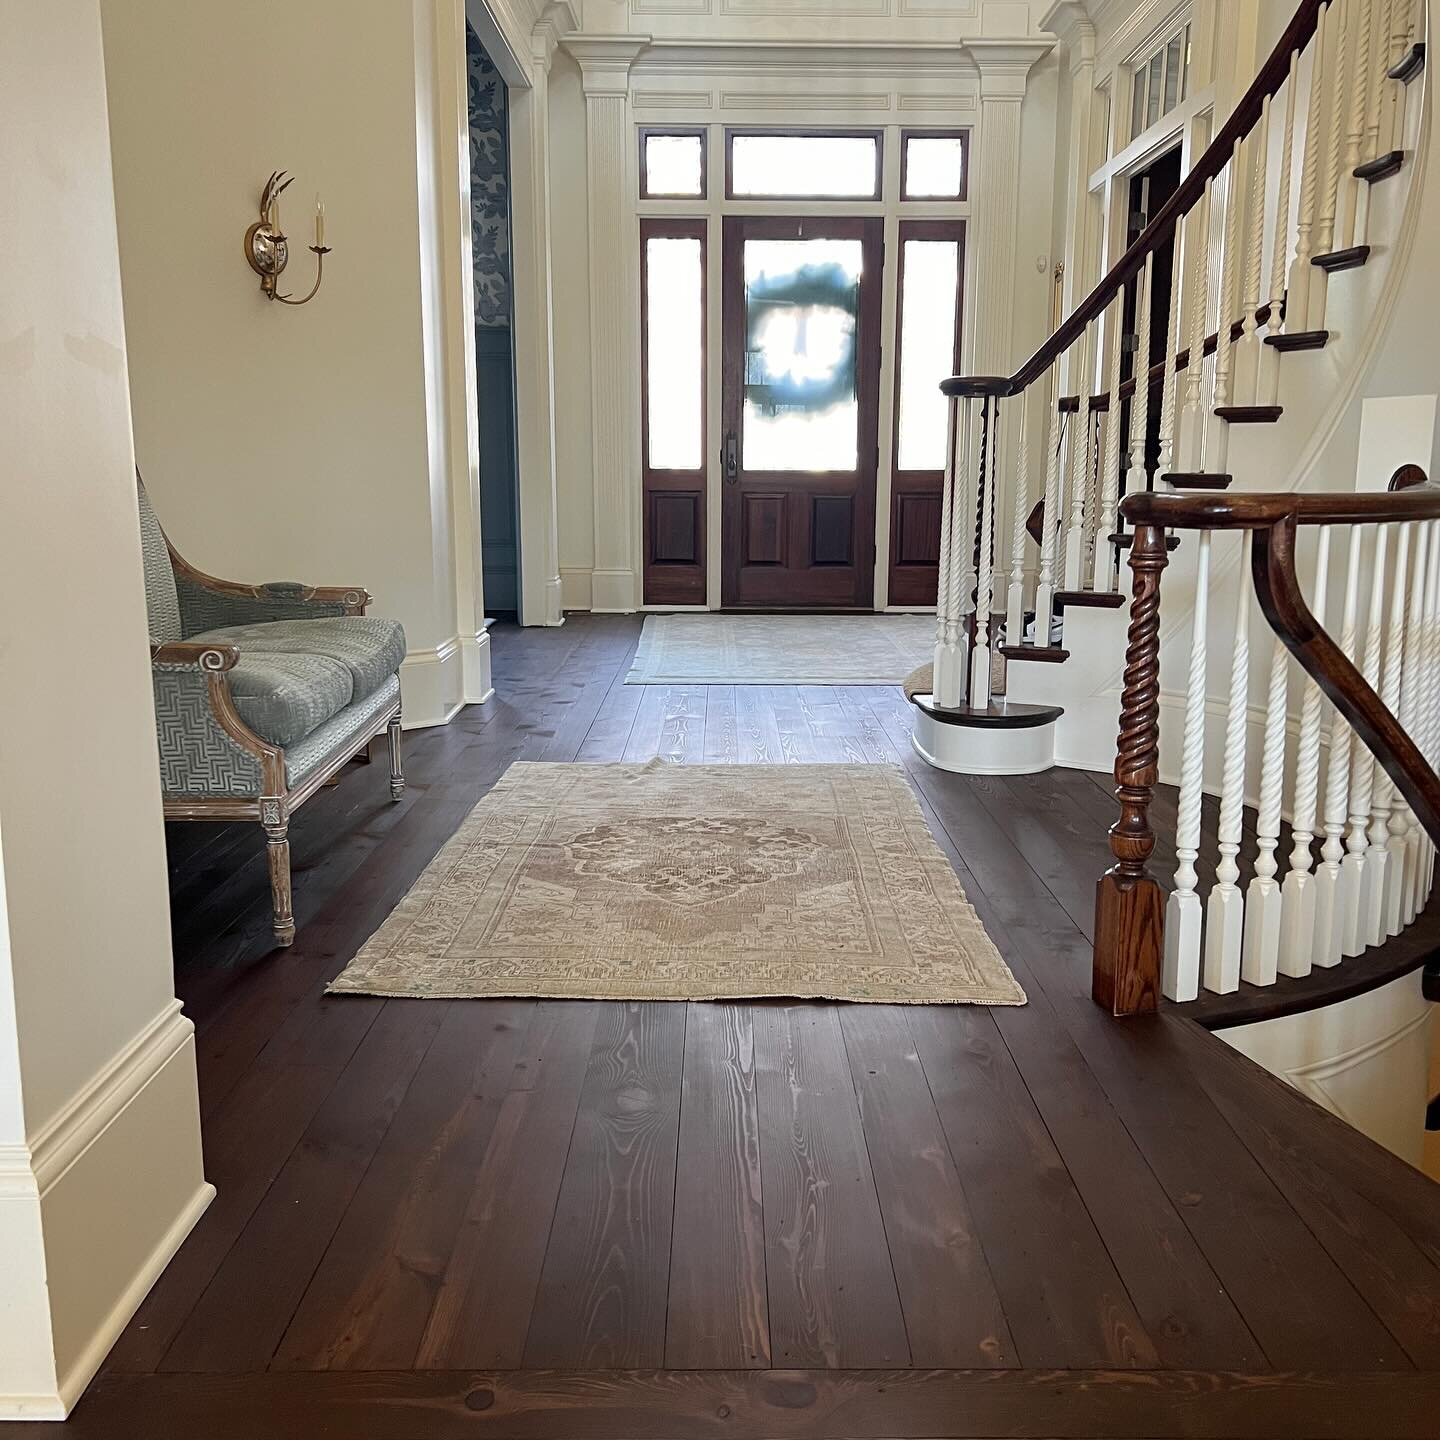 The elegant coziness of this amazing home has us wanting to never leave. Grateful for the opportunity to work our craft on the history filled 1850s reclaimed heart pine floors. They are now a perfect compliment to the exquisite design of the space.
S